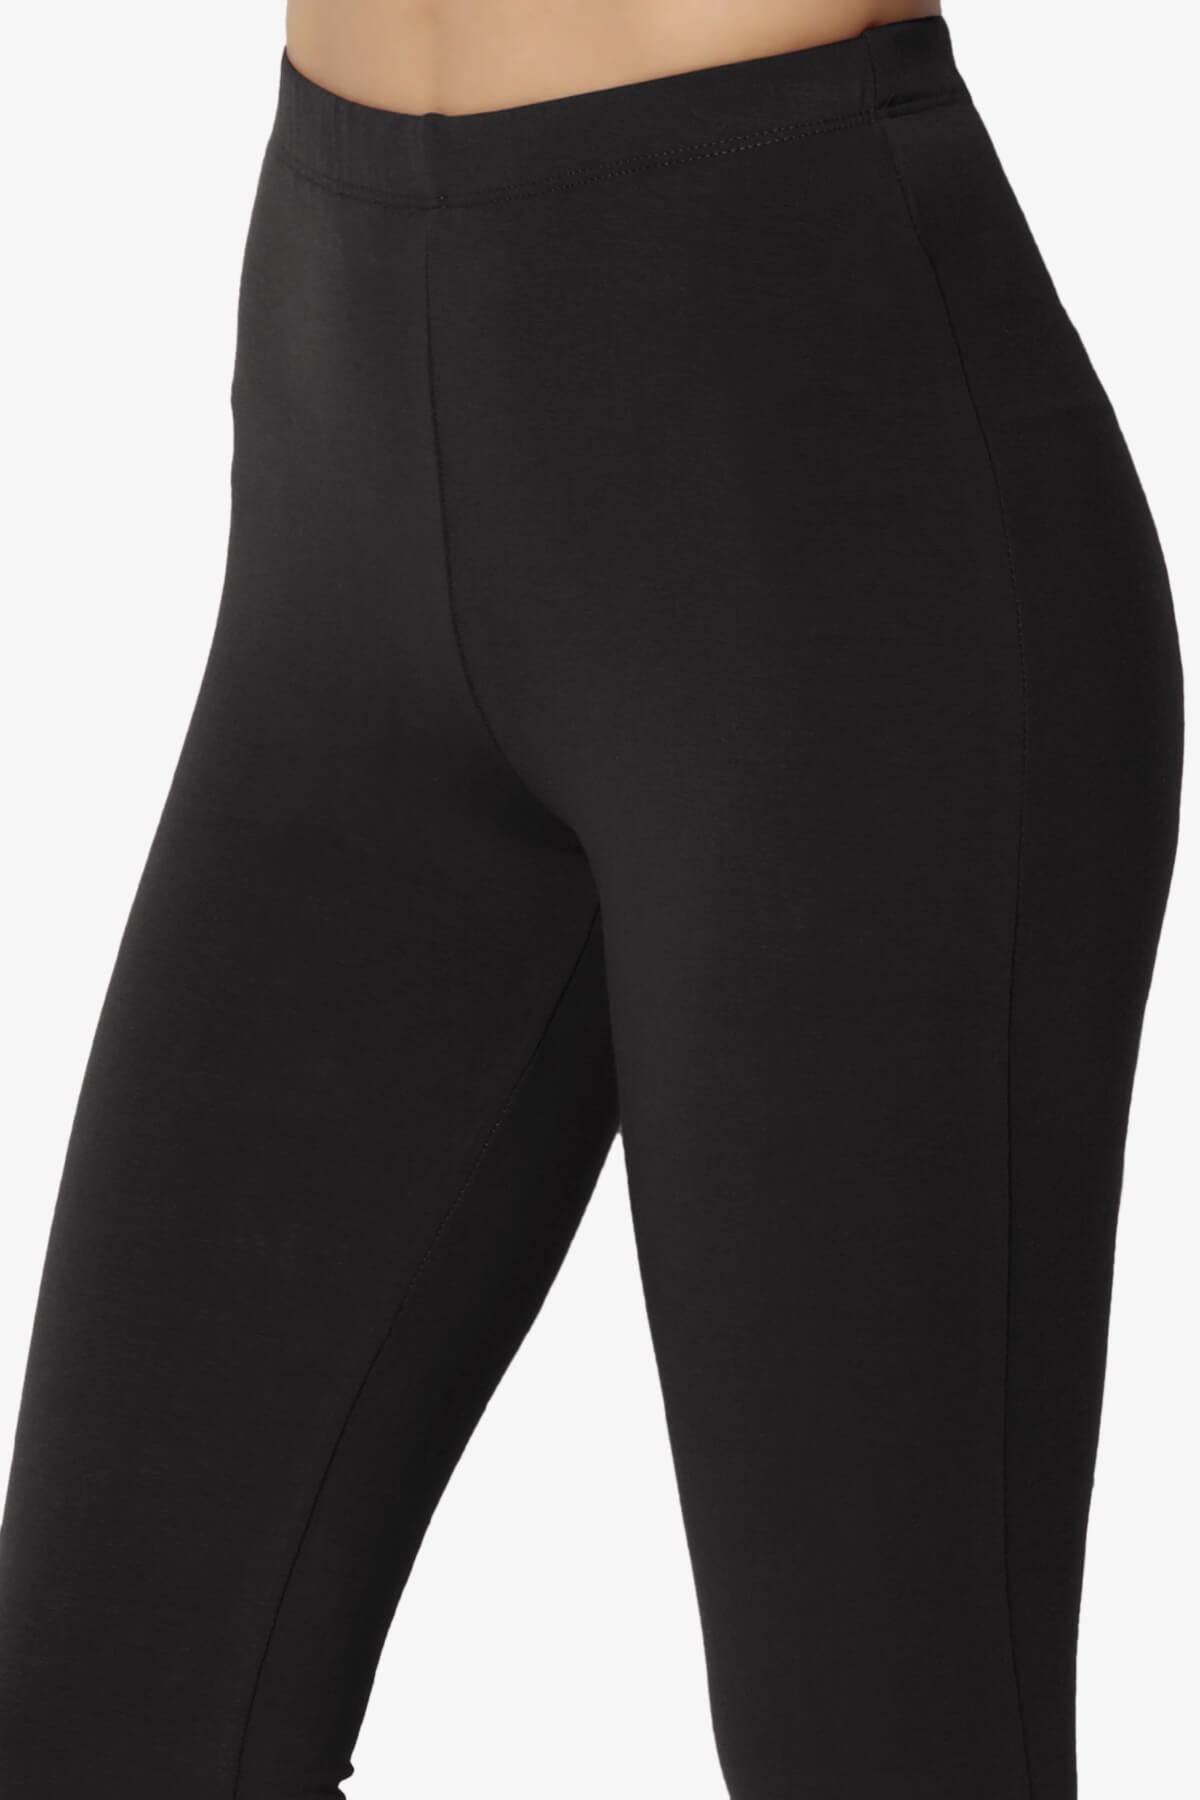 Load image into Gallery viewer, Ansley Luxe Cotton Capri Leggings BLACK_5
